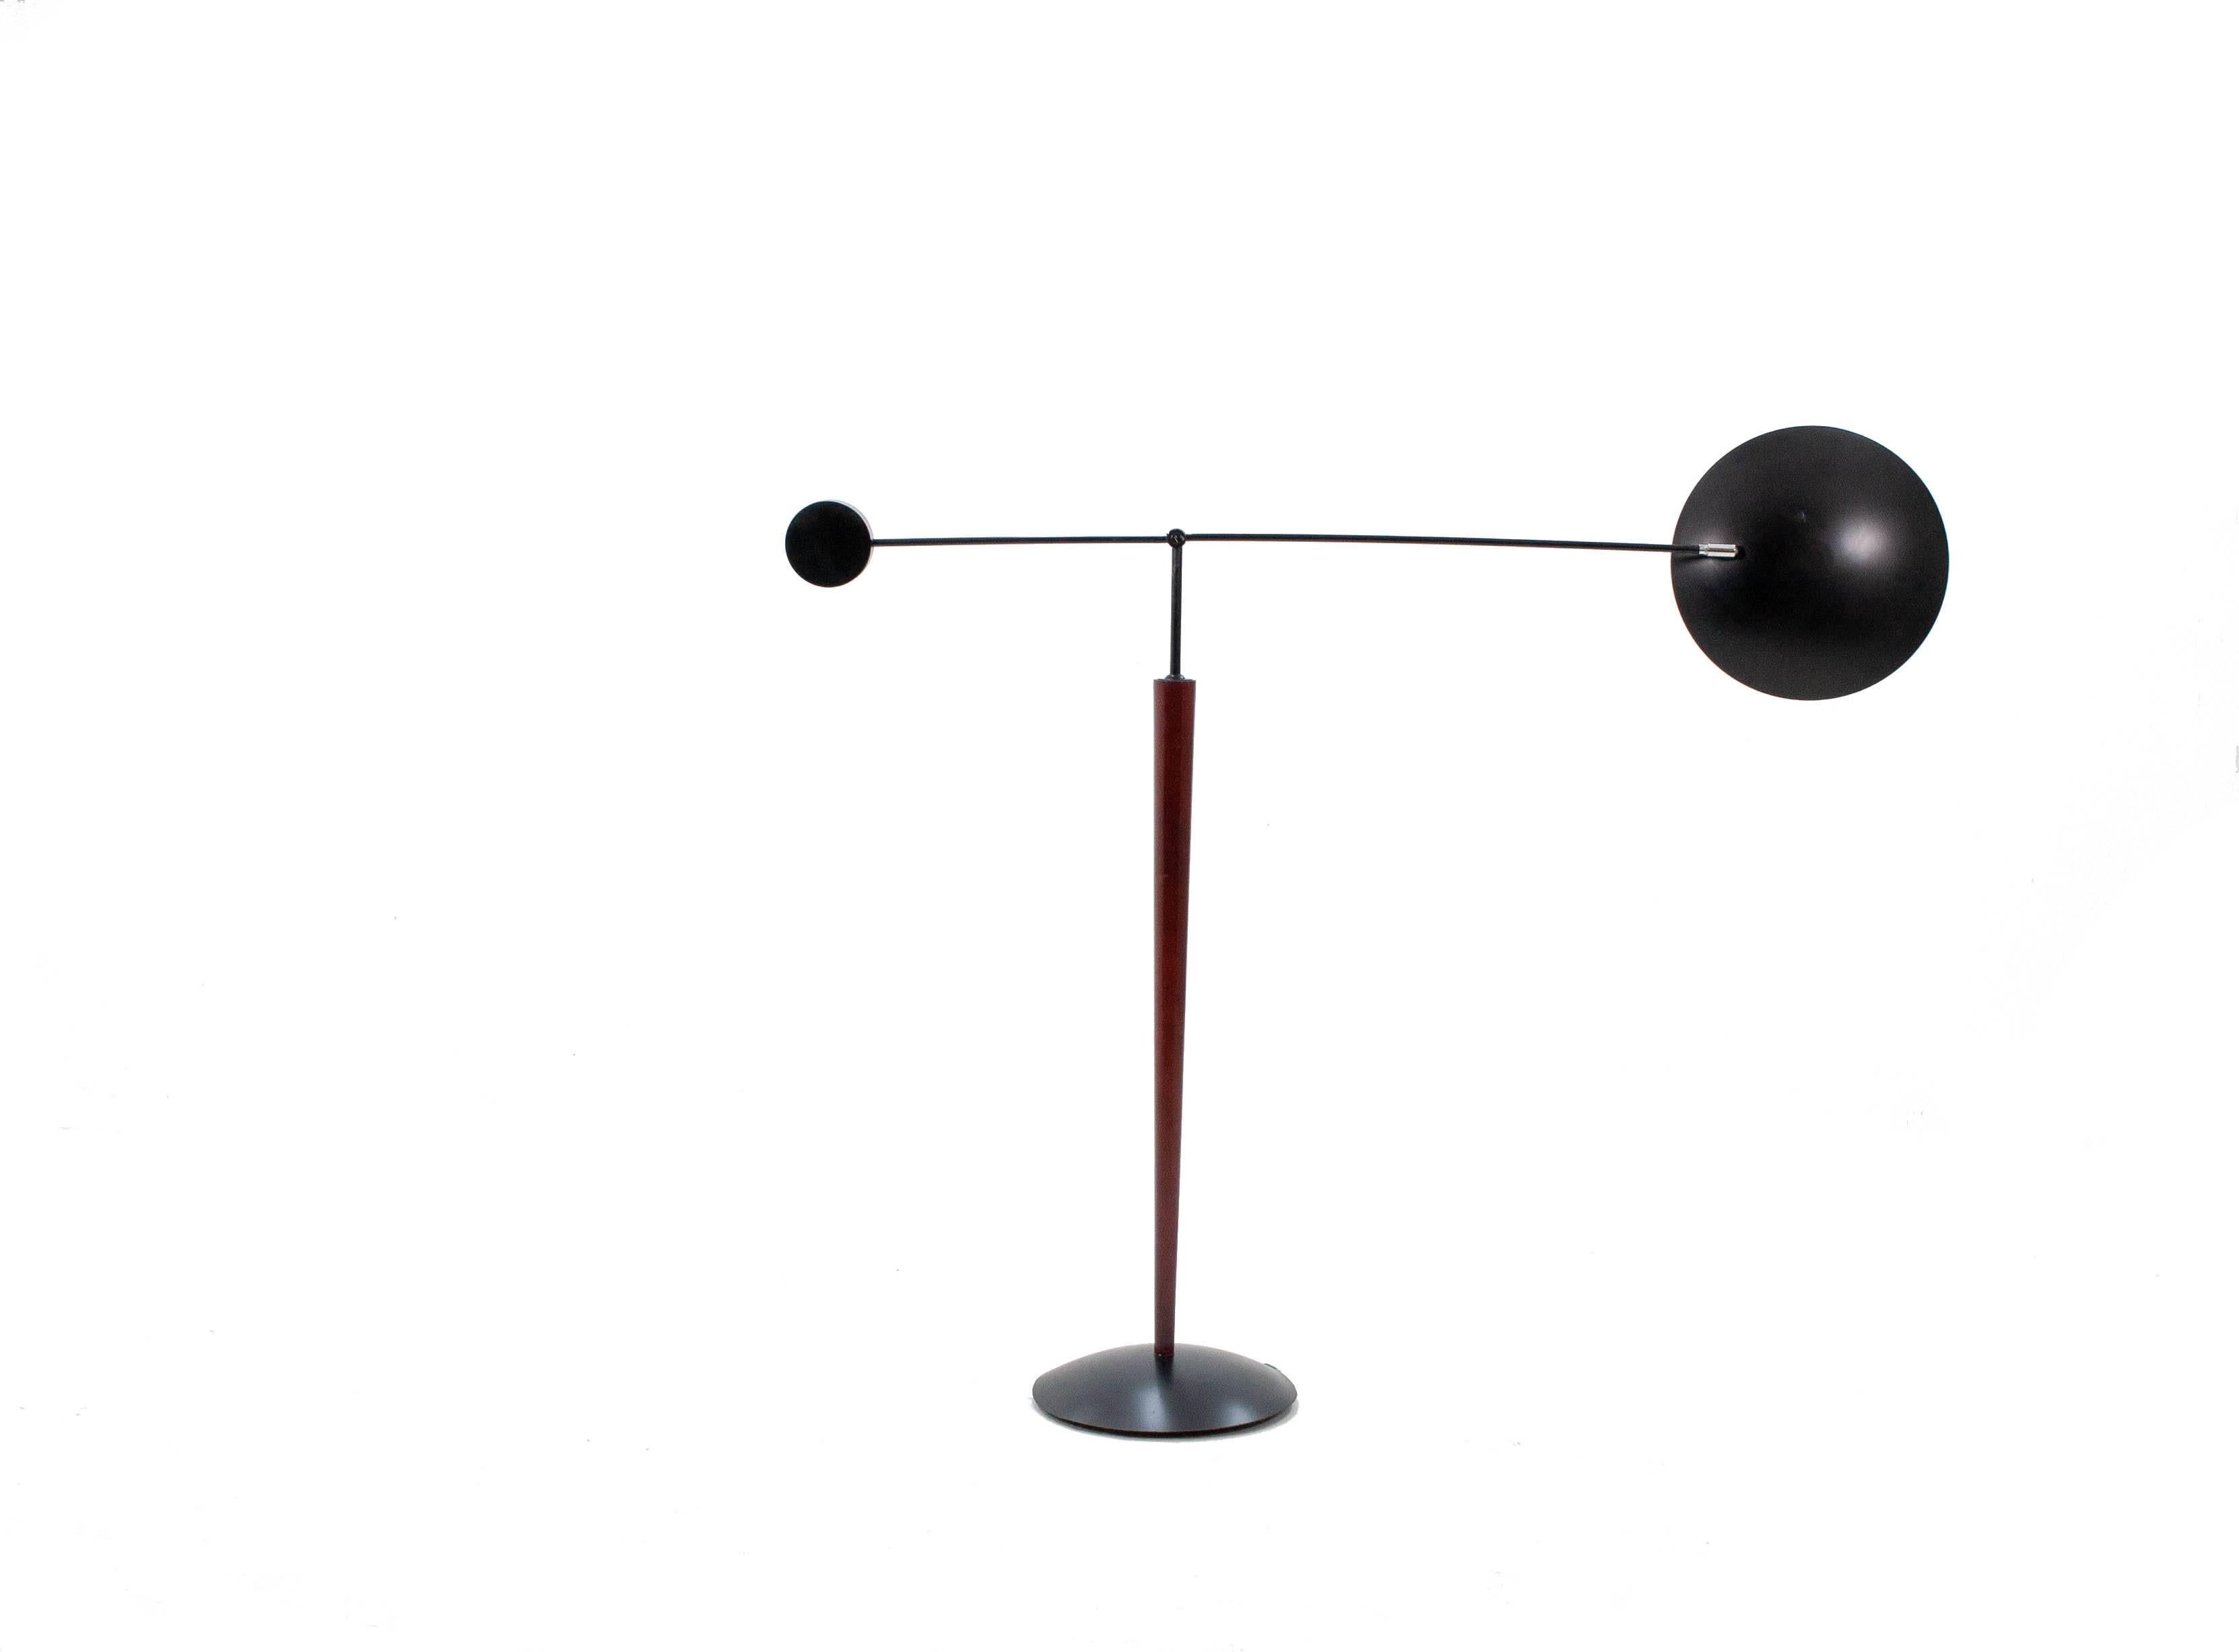 Large and highly adjustable floor standing counterbalanced swing-arm lamp from the 1980s 'Balance' range by Dutch lighting specialists Herda. Dimmable halogen light in good working order and in overall very nice shape.